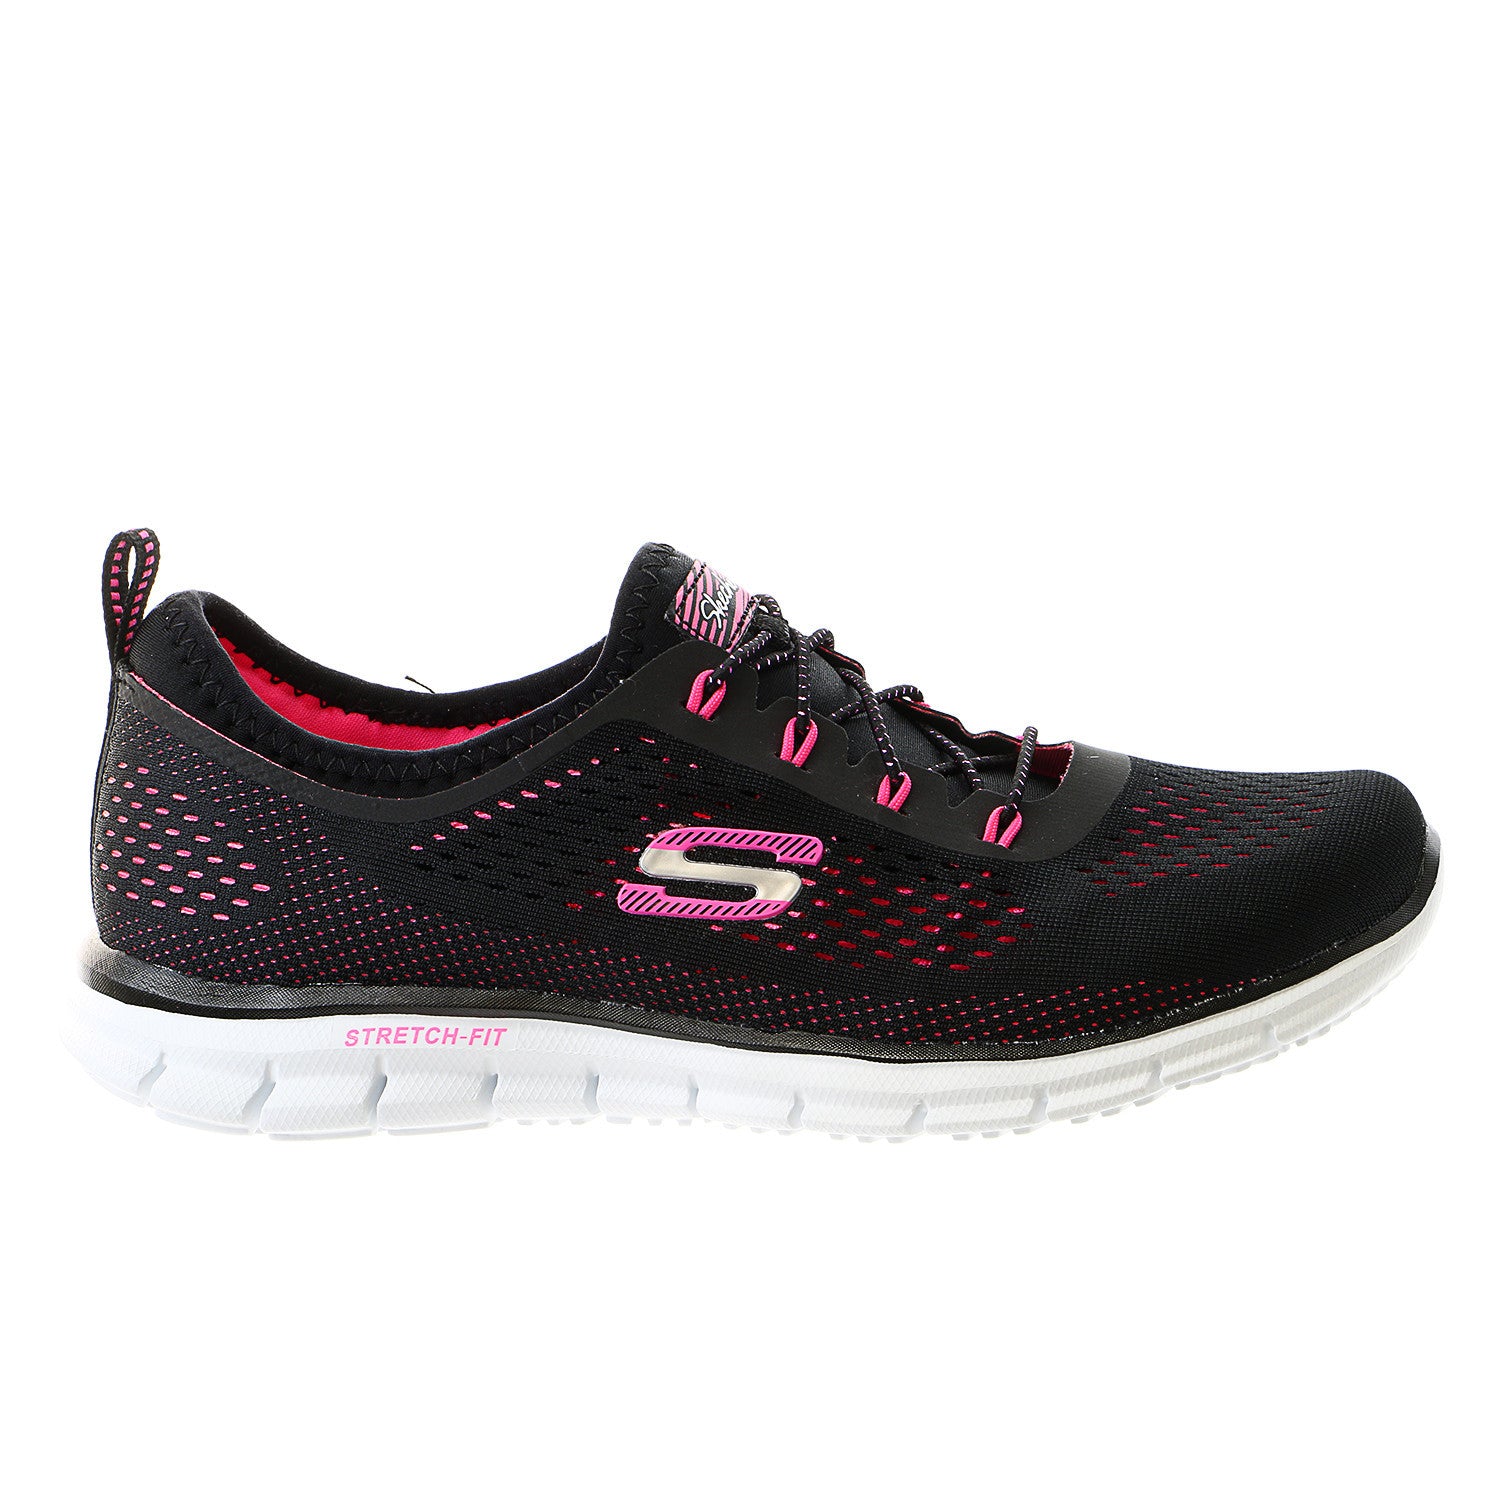 Skechers Sketch Knit Pink & Black High Top Woven Sneakers Shoes